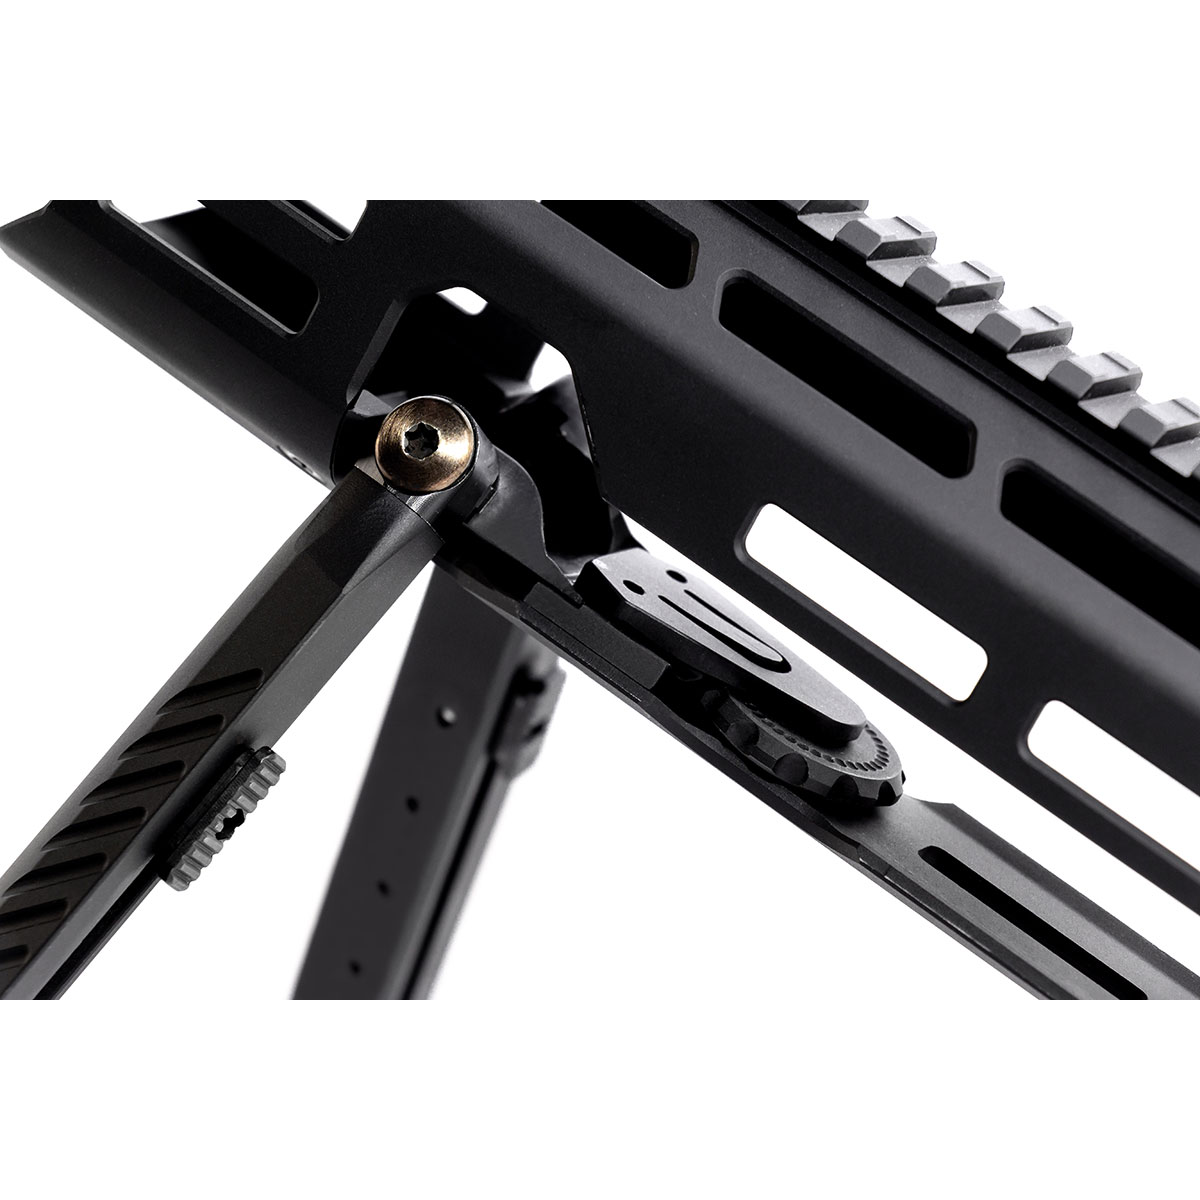 BLK LBL CORPORATION BIPODS FOR DPMS AR-10 RIFLE | Brownells